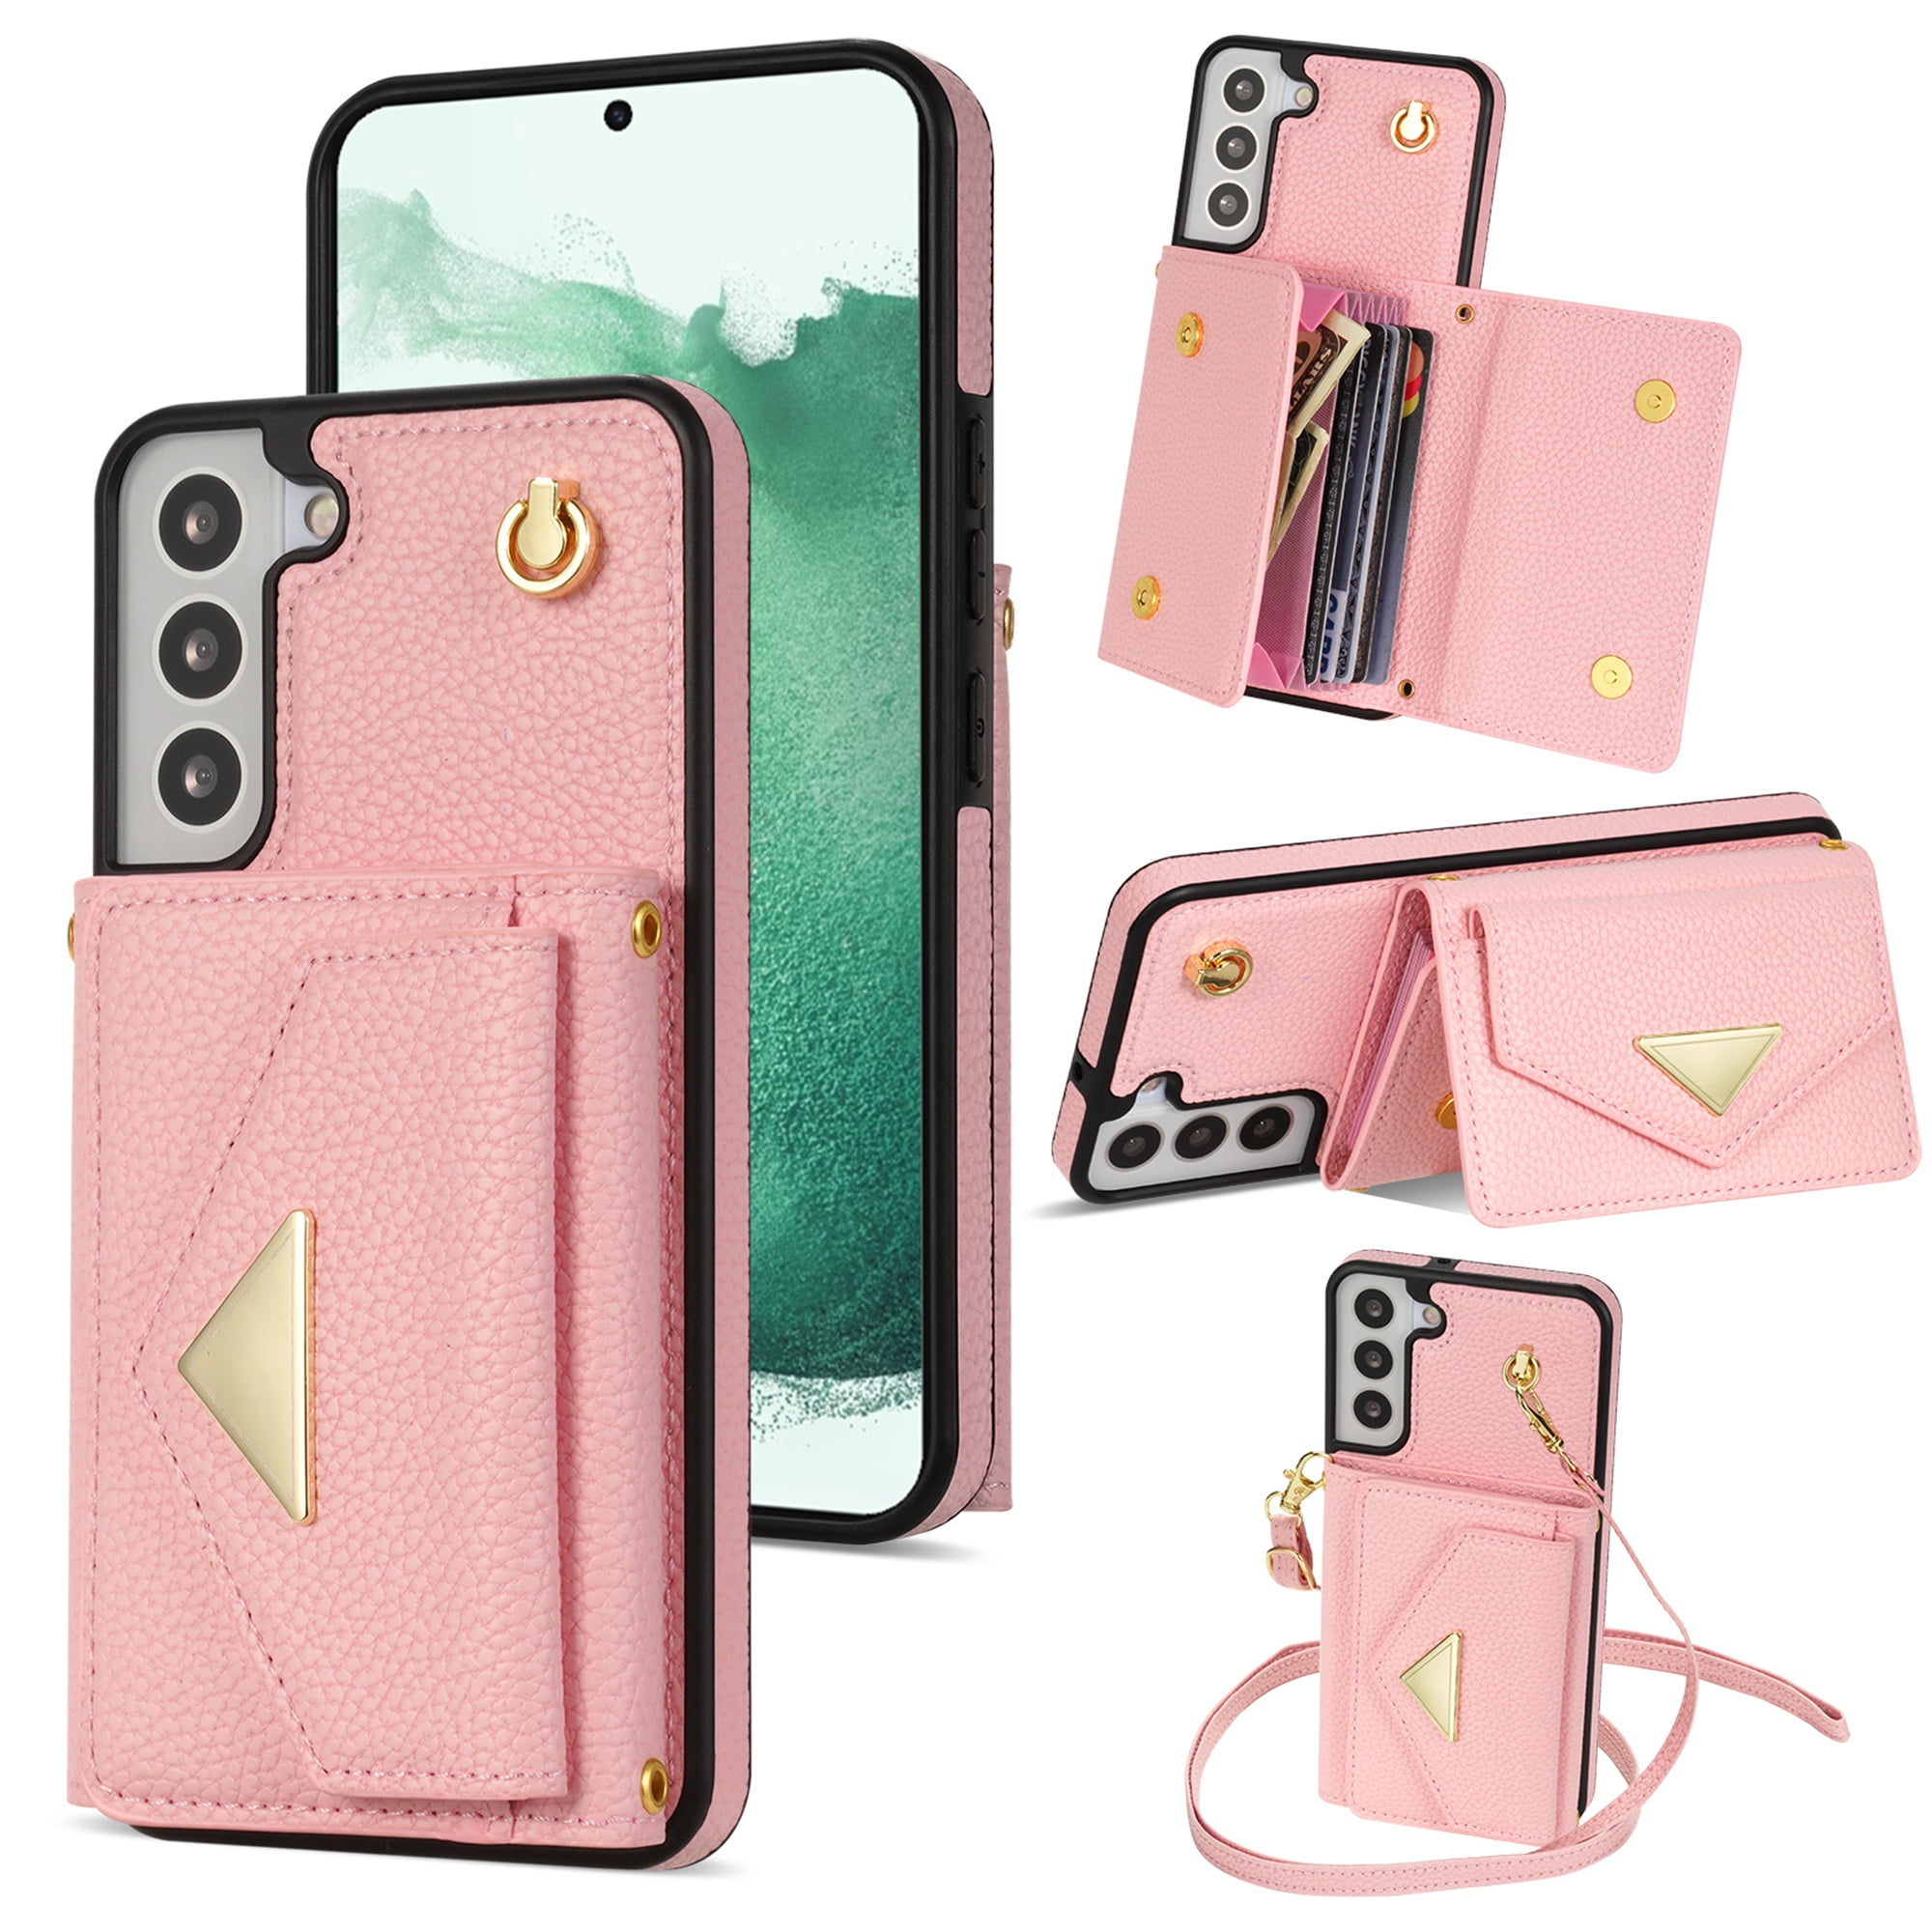 Woman On The Move | Phone Cover & Leather Purse Combos